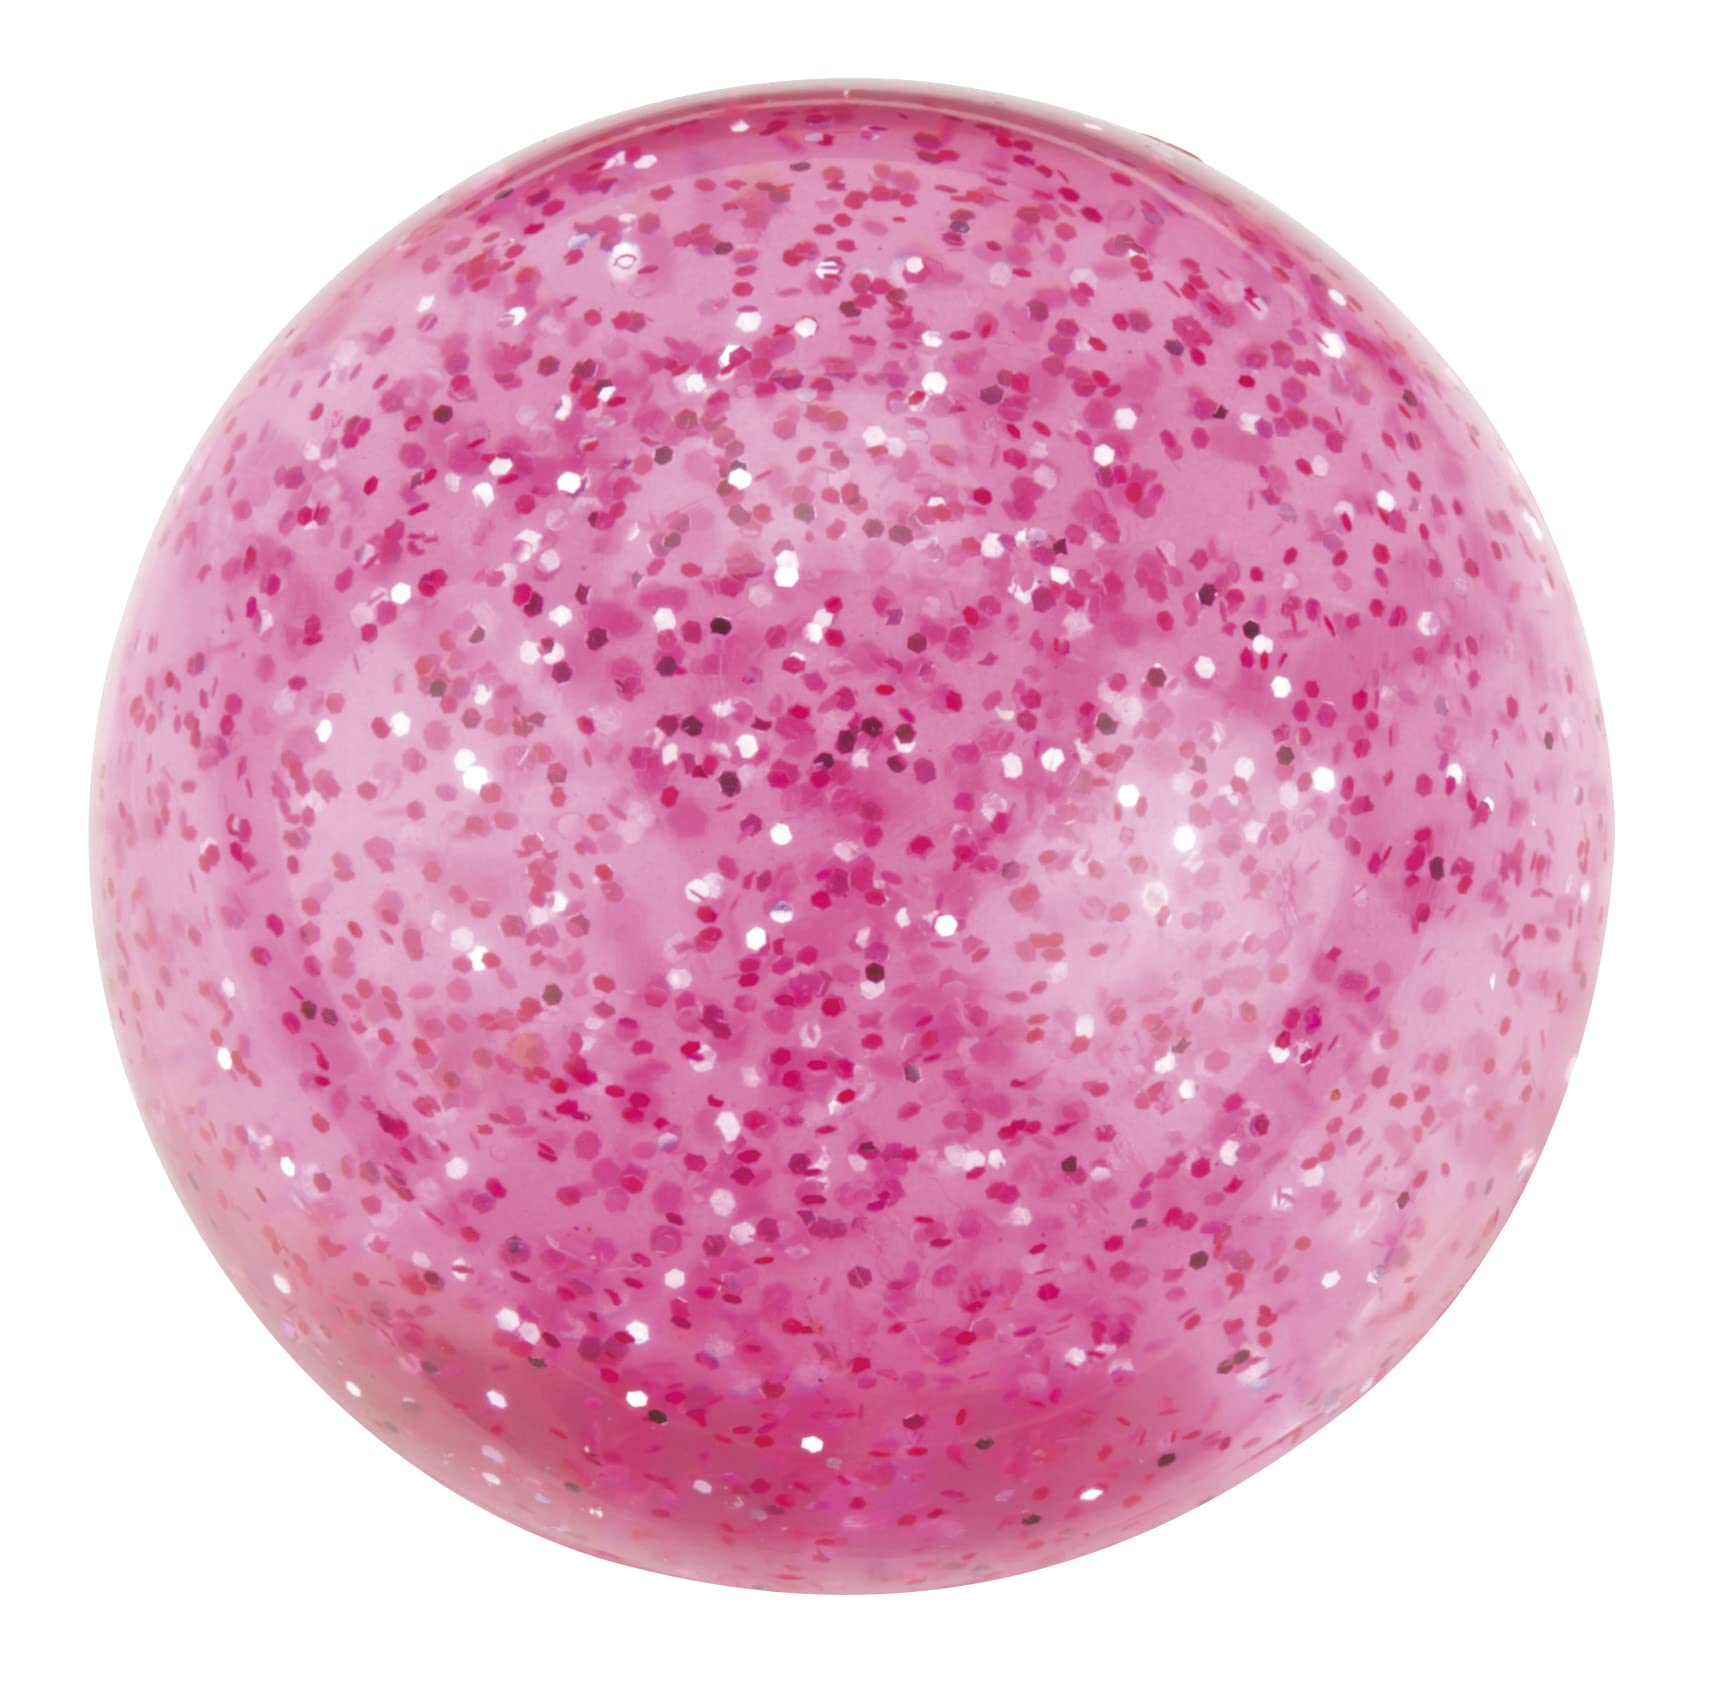 Toysmith Glitter Bouncy Balls-Impulse Toy, Fidget Toy, for Boys and Girls Ages 3+